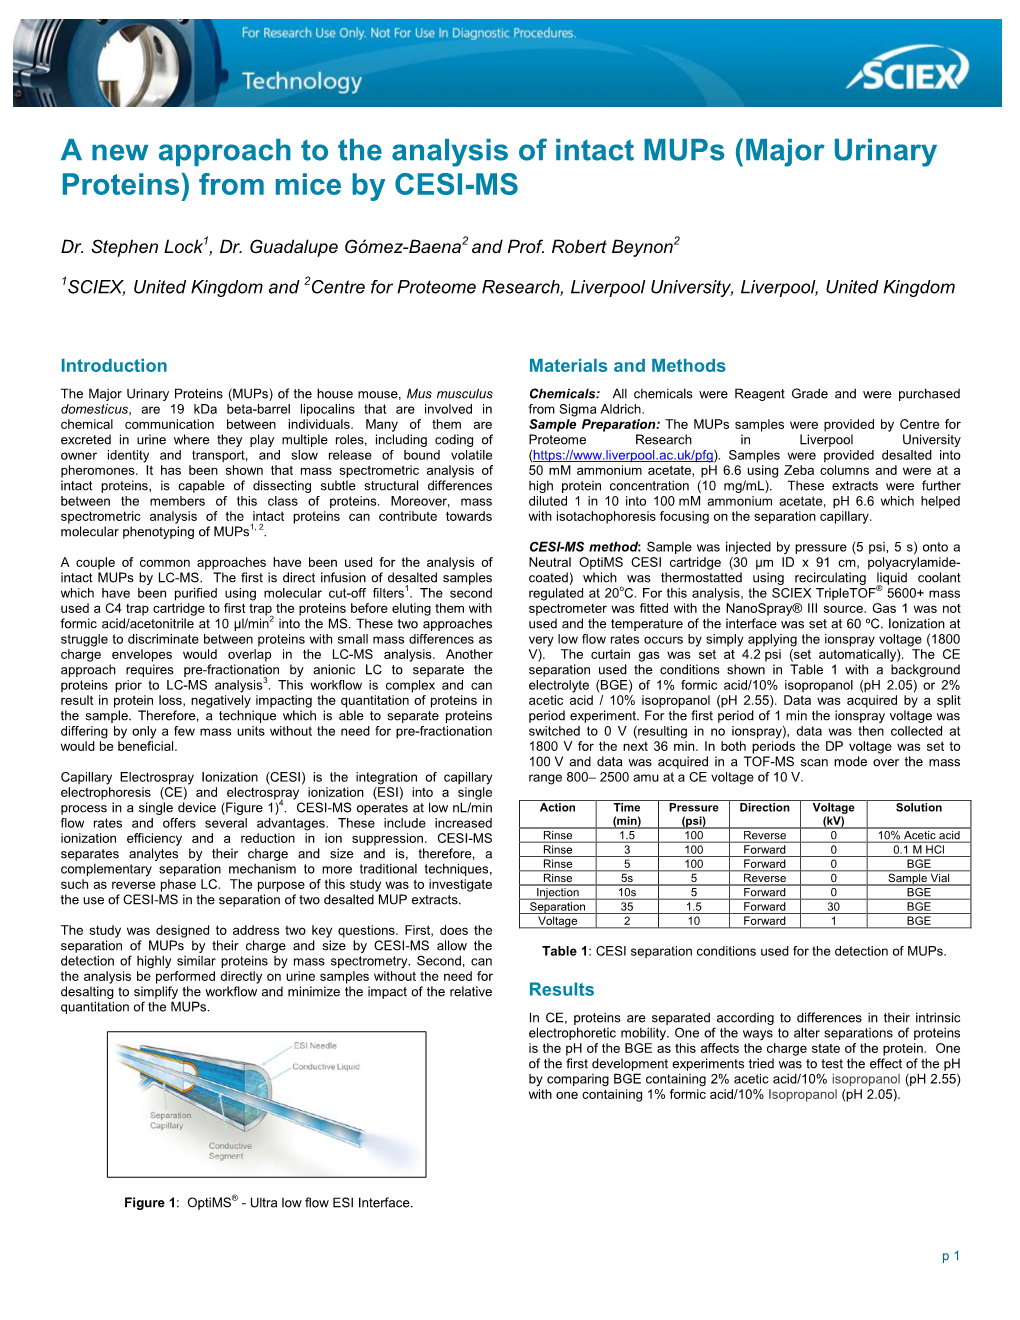 Analysis of Intact Mups (Major Urinary Proteins) from Mice by CESI-MS